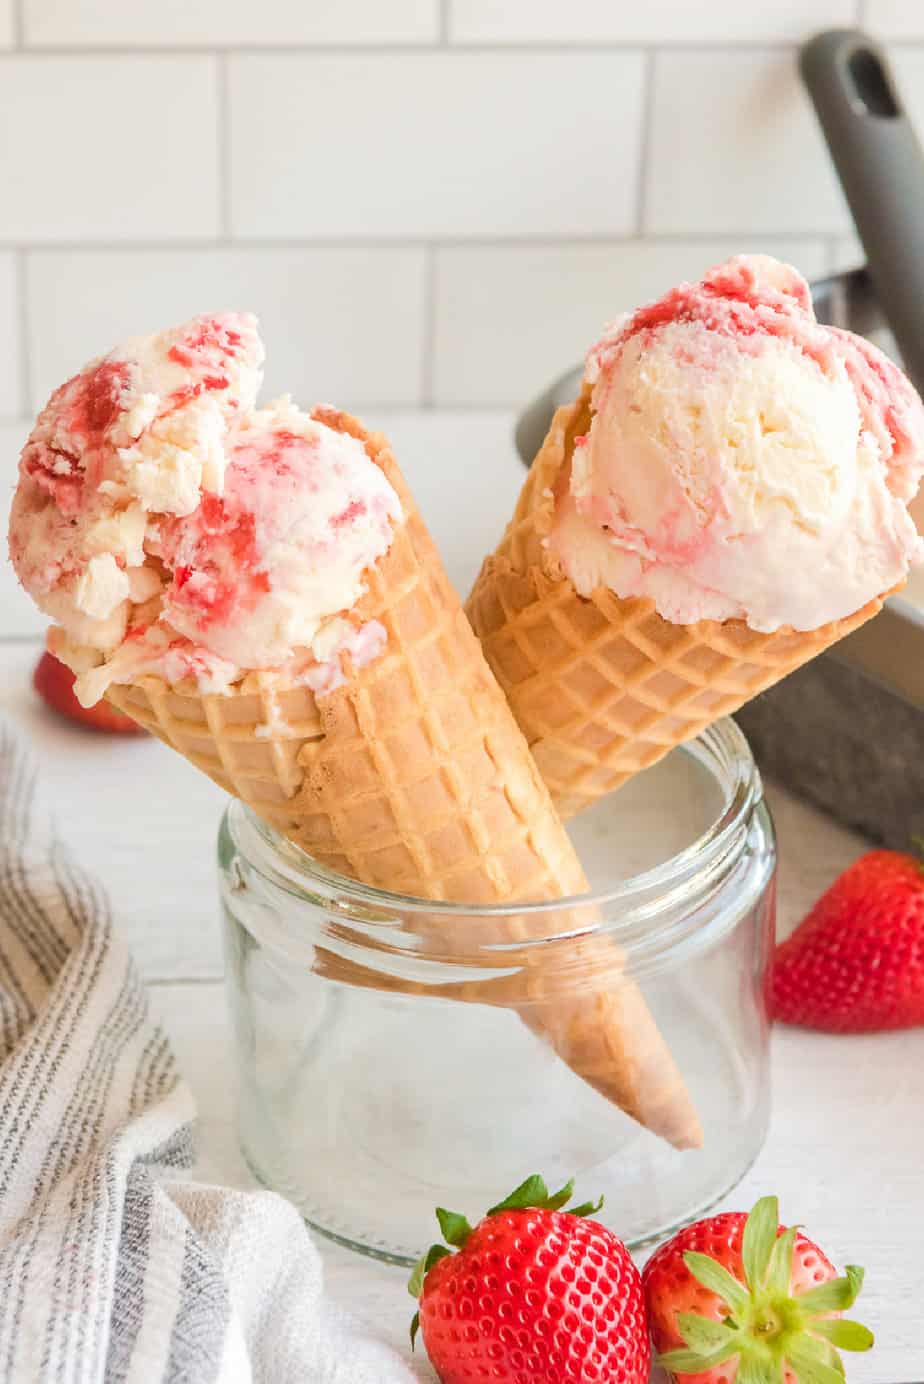 Two ice cream cones full of strawberry ice cream resting in a glass jar from the side with fresh strawberries nearby.